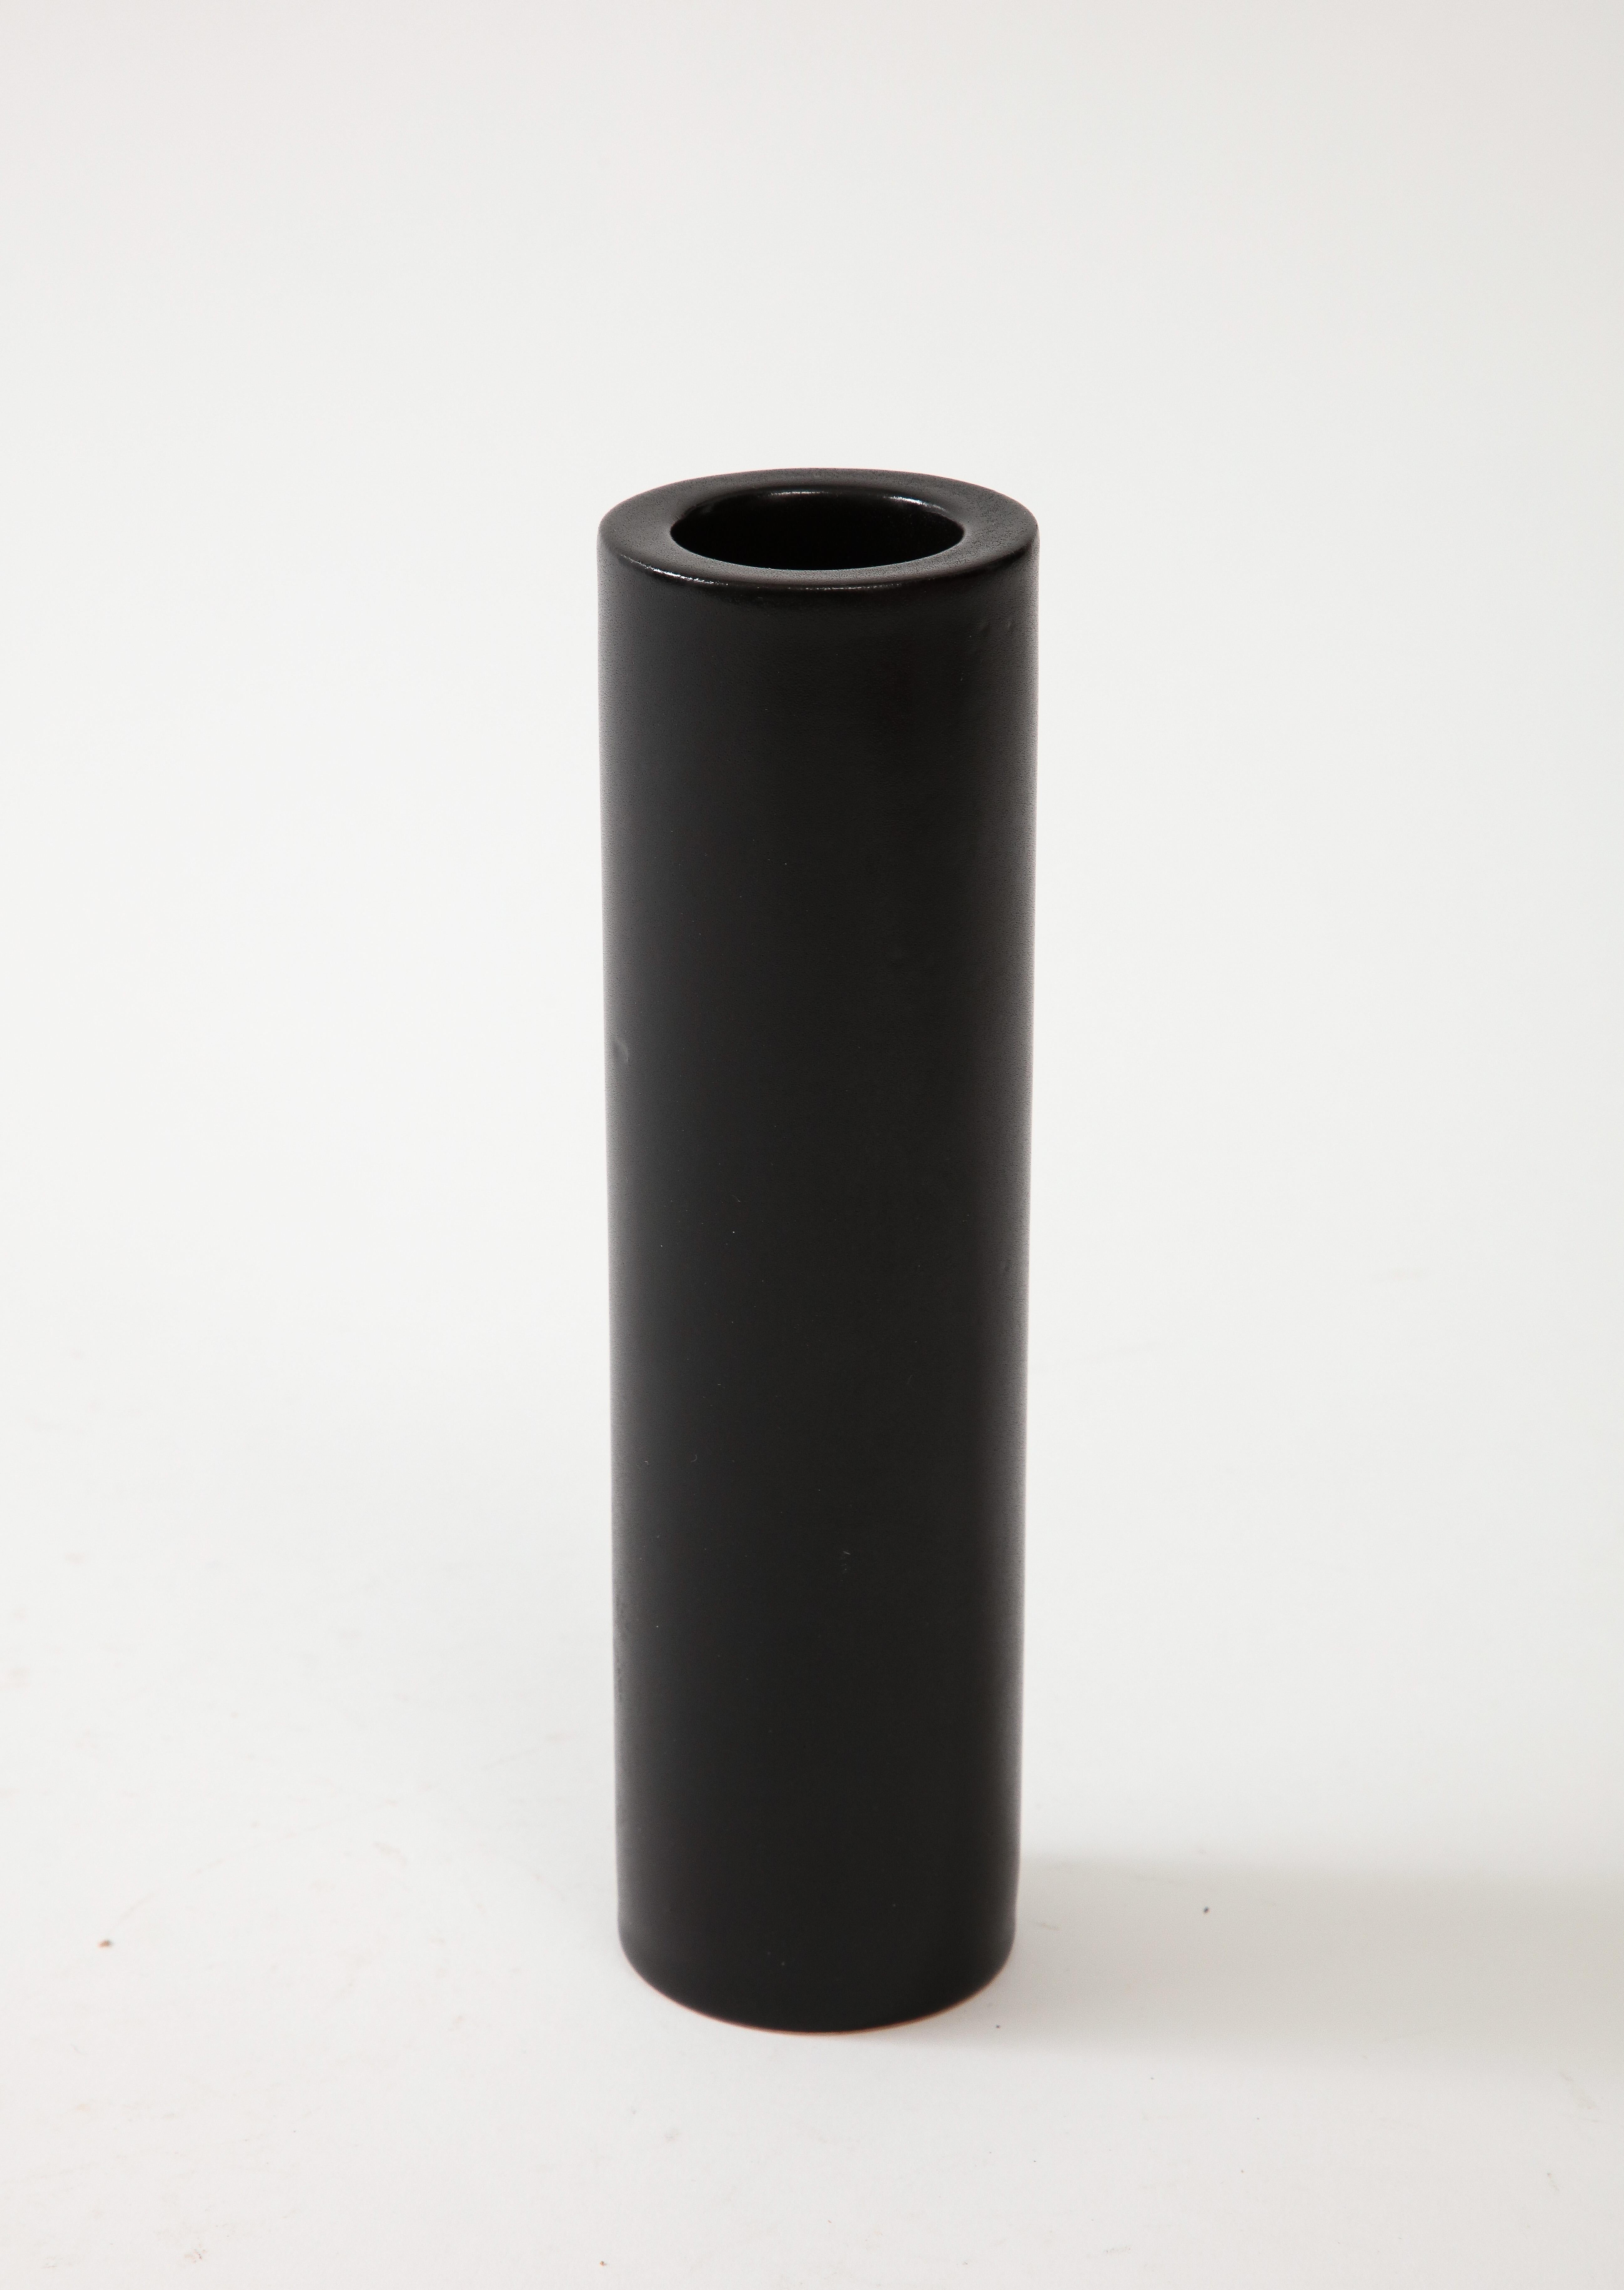 Franco Pozzi Cylinder Thick Walled Vase, Italy, c. 1970 In Good Condition For Sale In Brooklyn, NY